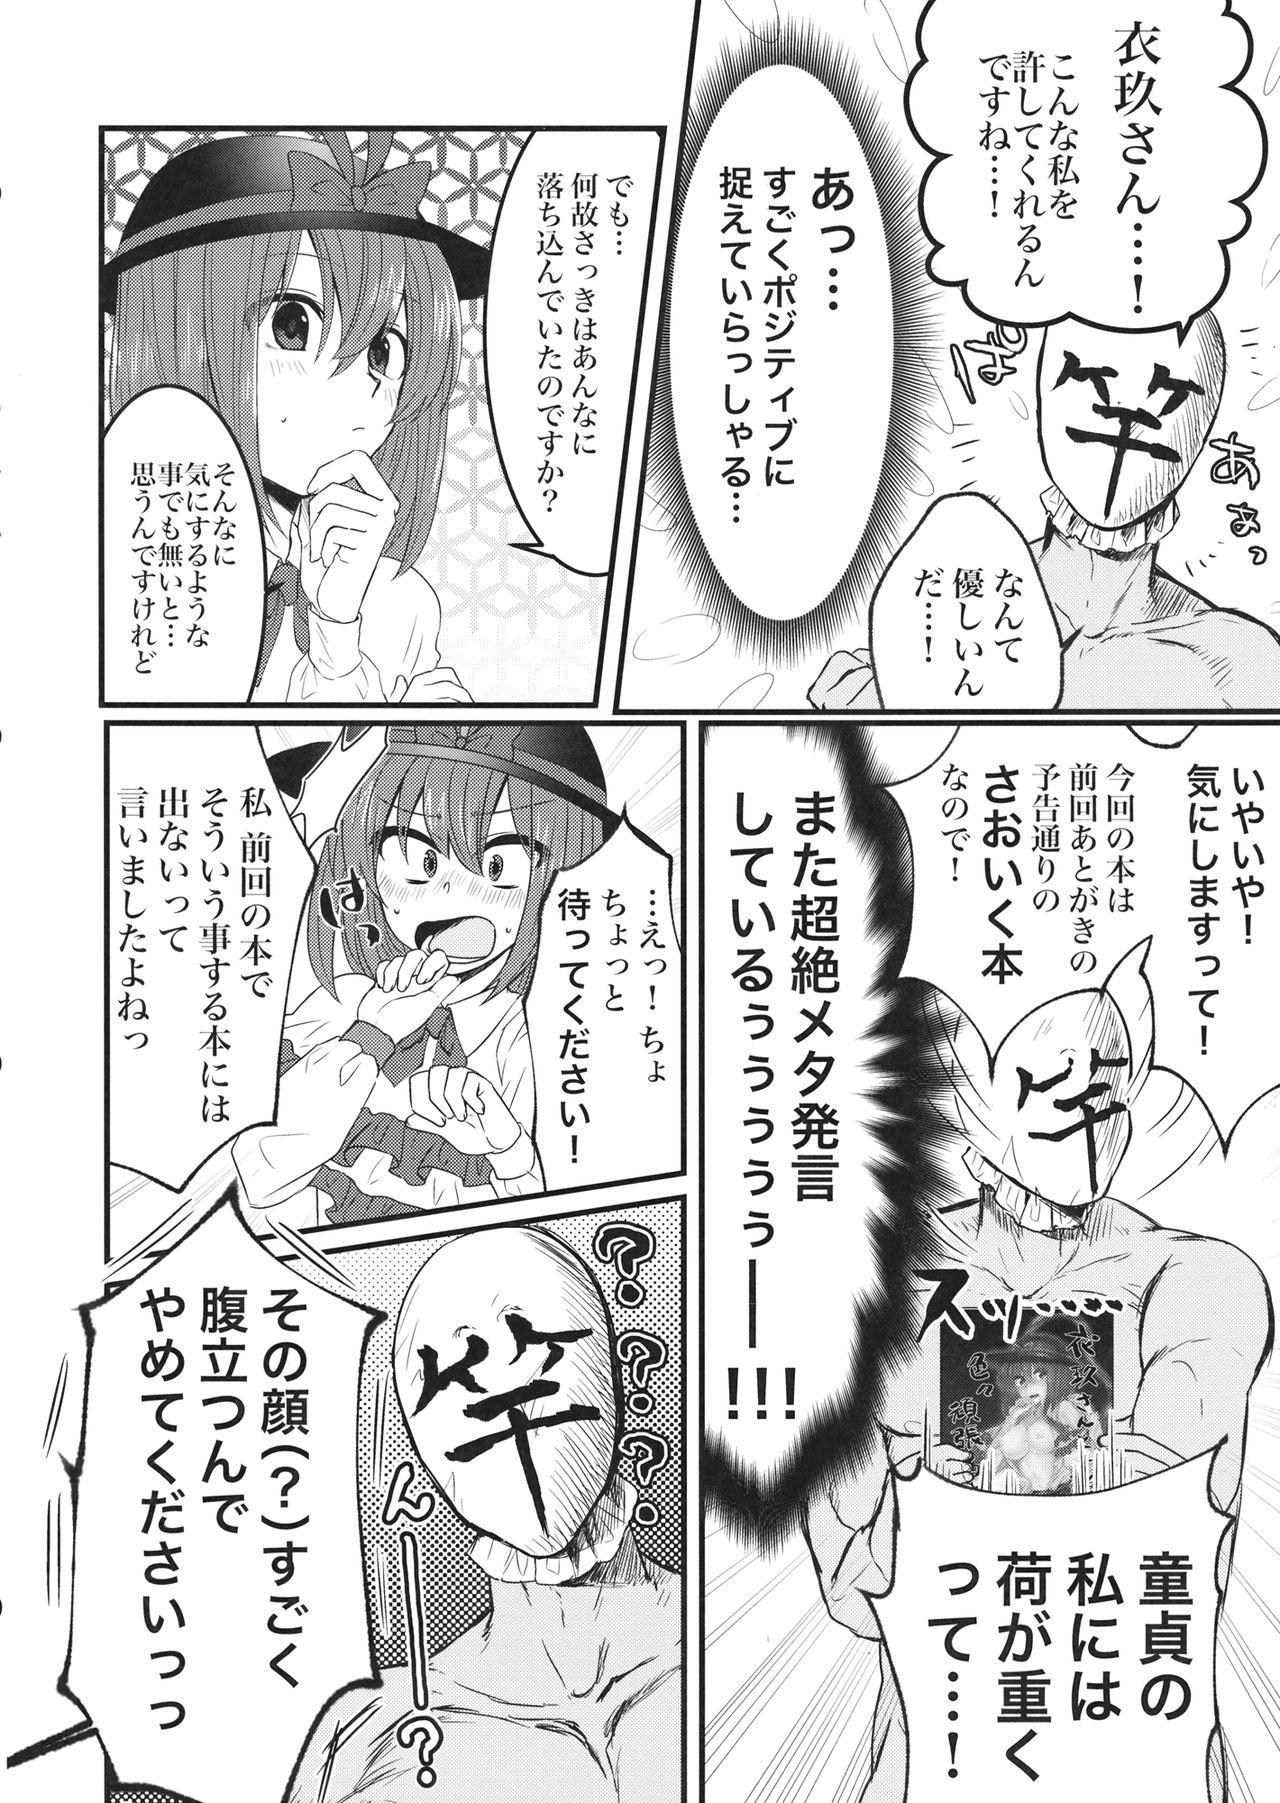 Rico 衣玖さんと一緒に色々頑張る本 - Touhou project Mexican - Page 7